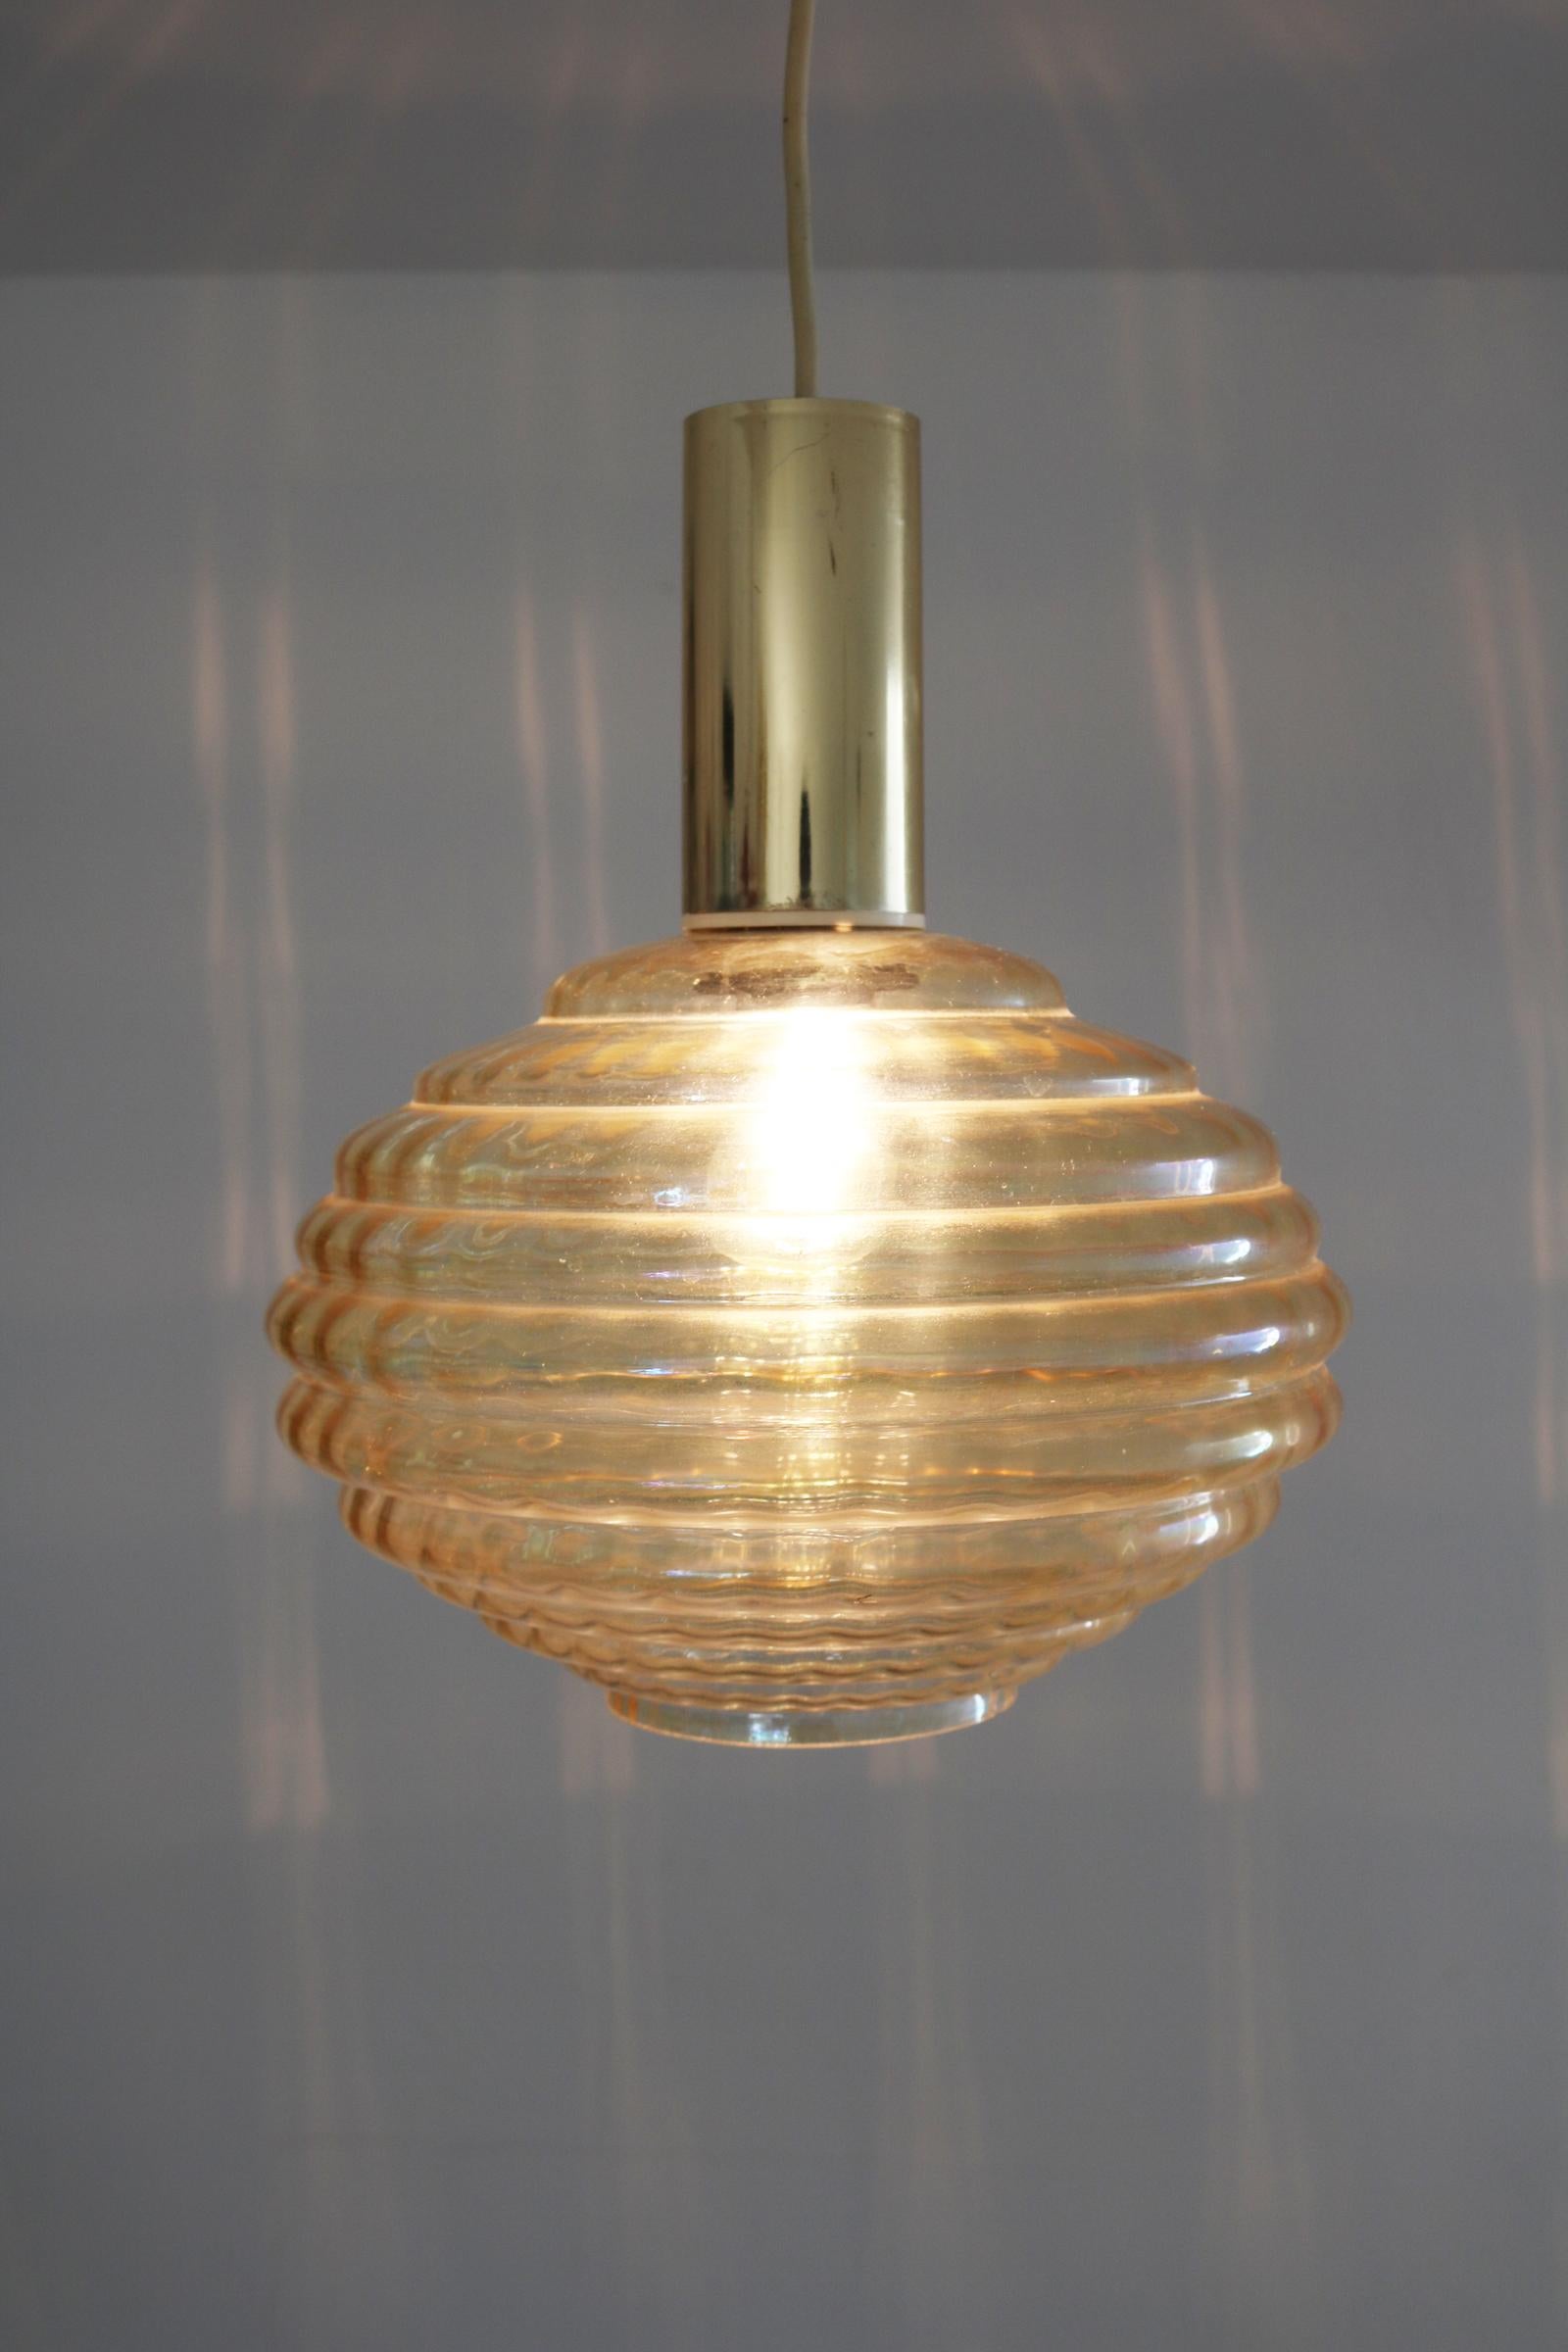 Helena Tynell glass pendant lamp for Glashutte Limburg, Germany, 1960s
Light amber glass and brass. 1xE27 fitting.